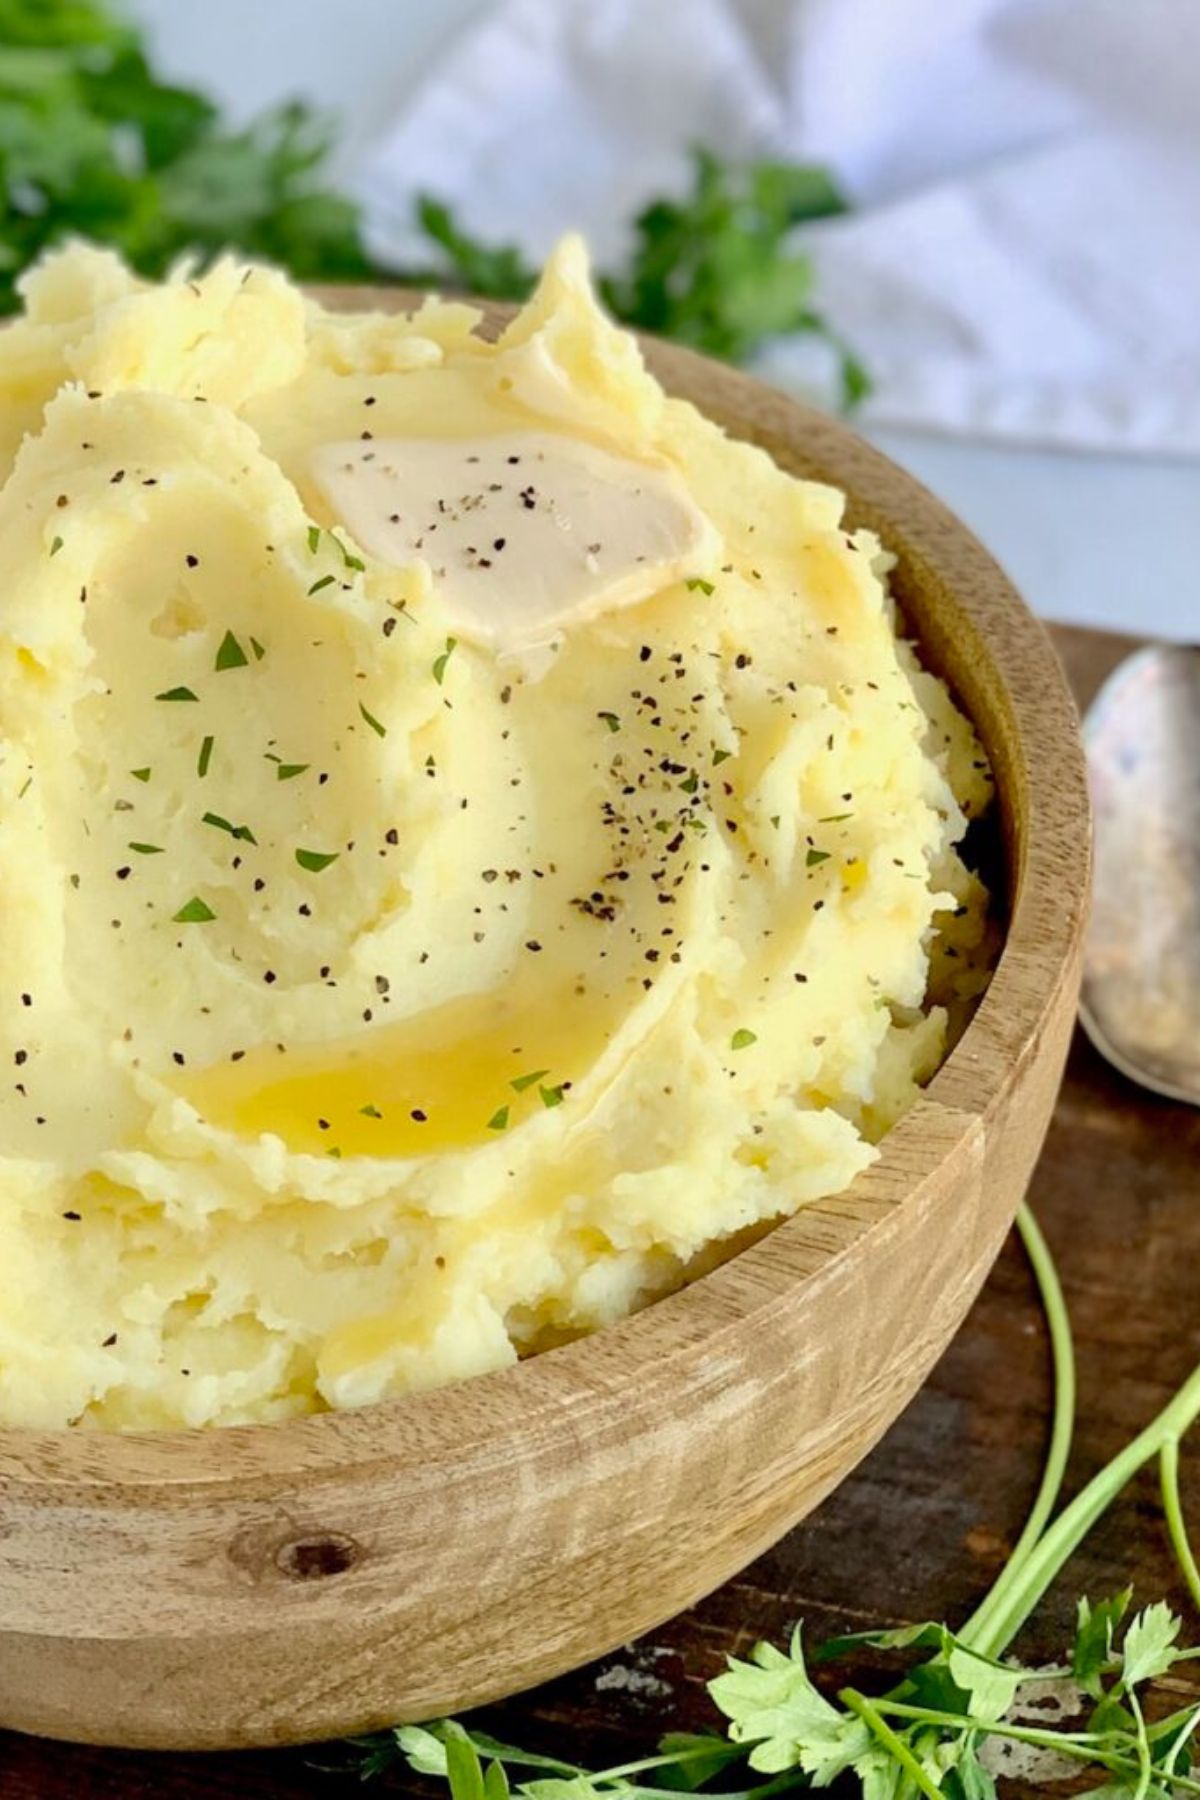 A wooden bowl of dairy free mashed potatoes.